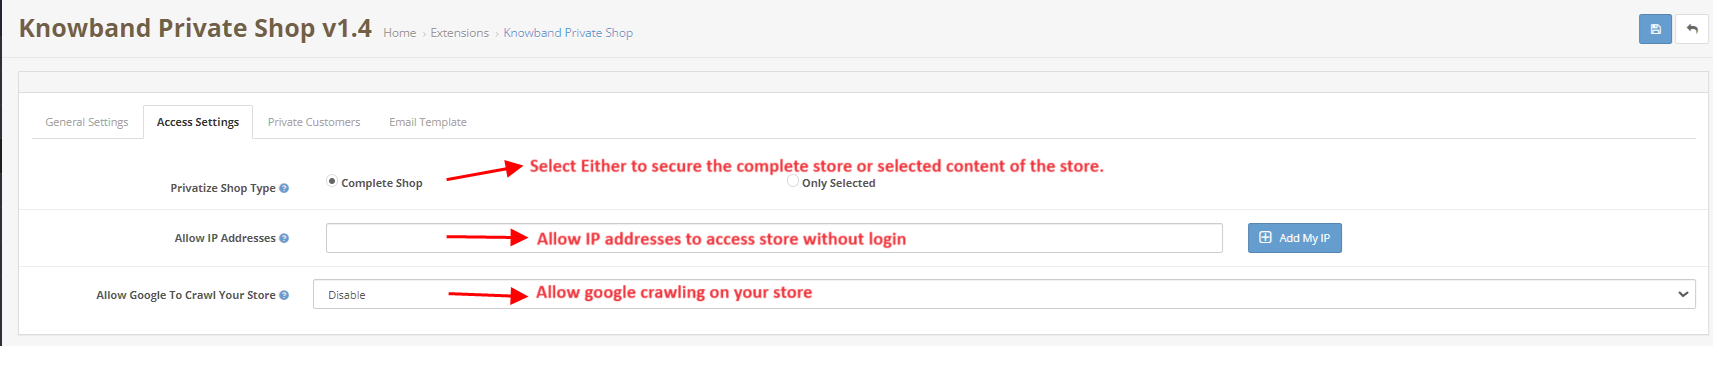 Access setting in knowband OpenCart Private Shop Extension